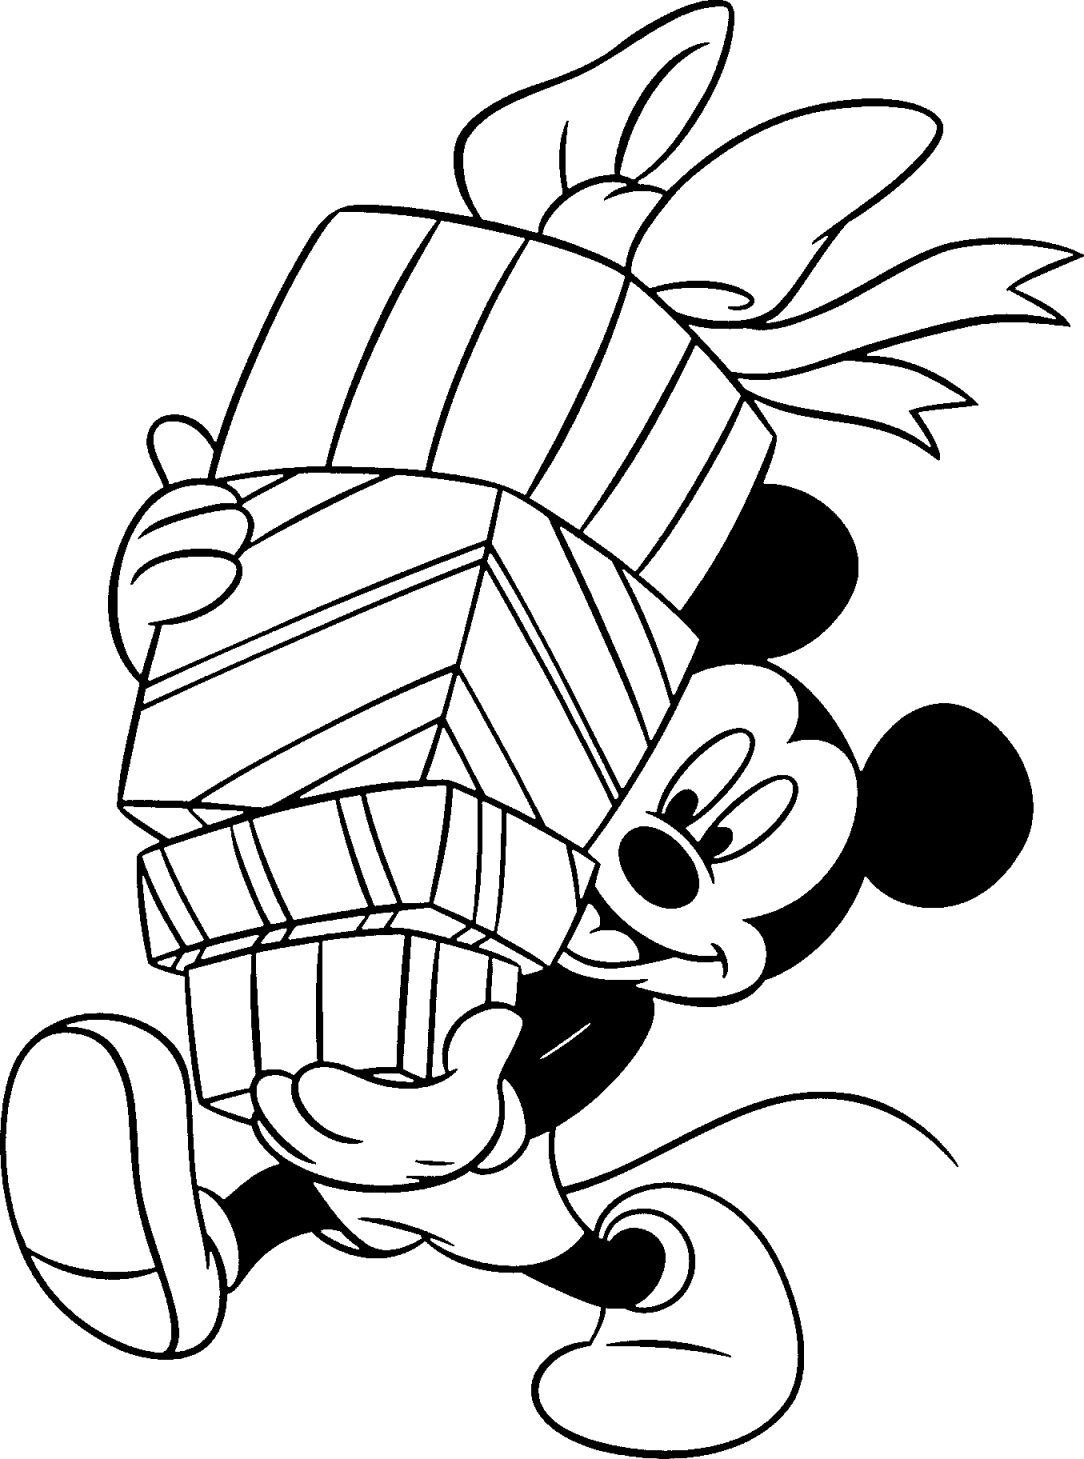 Download DISNEY COLORING PAGES: MICKEY MOUSE DISNEY COLORING PAGES